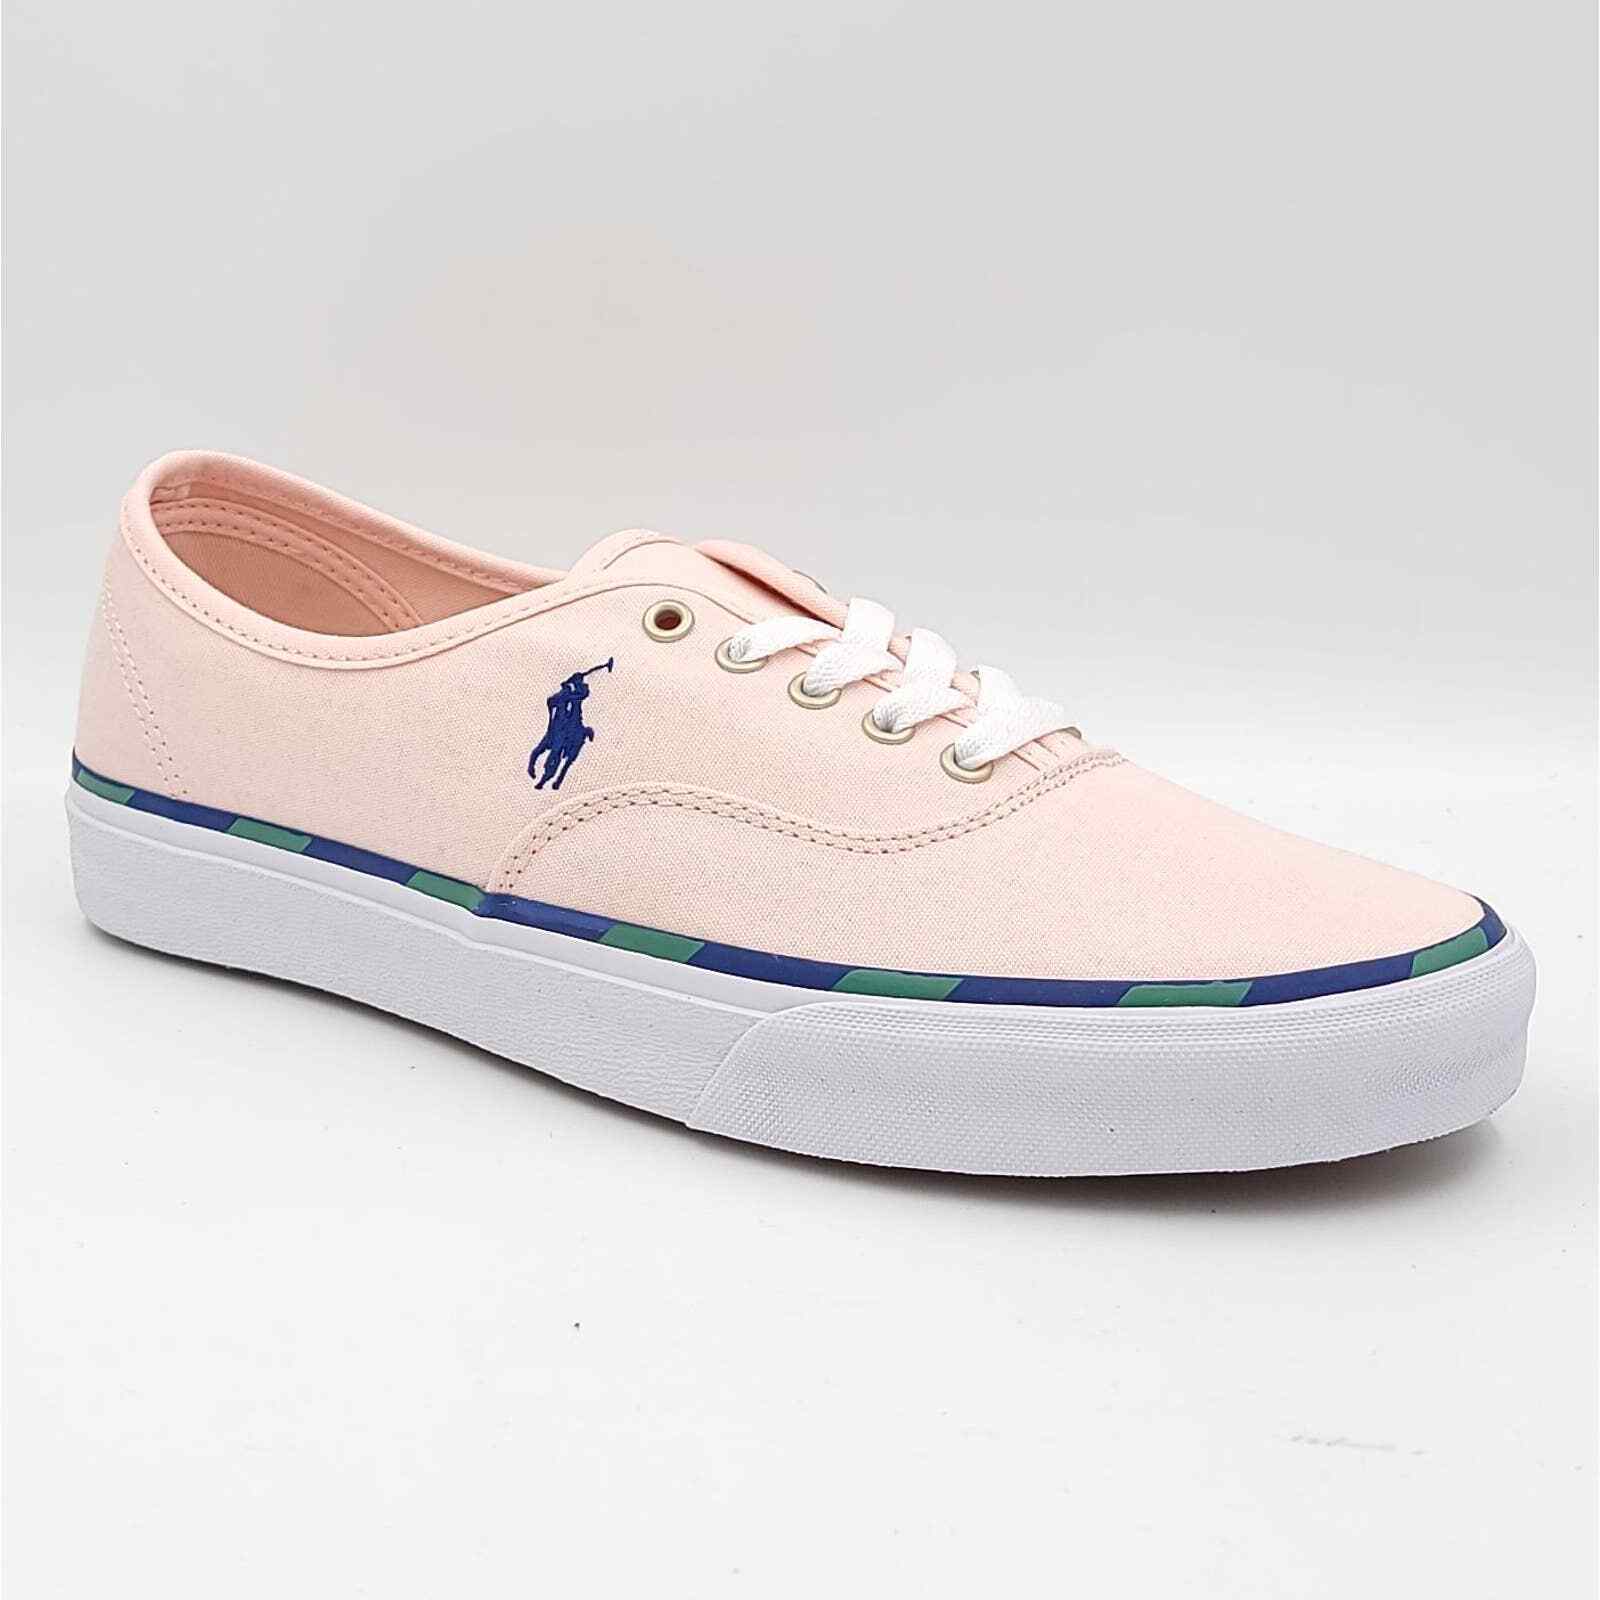 old school polo canvas shoes - Gem